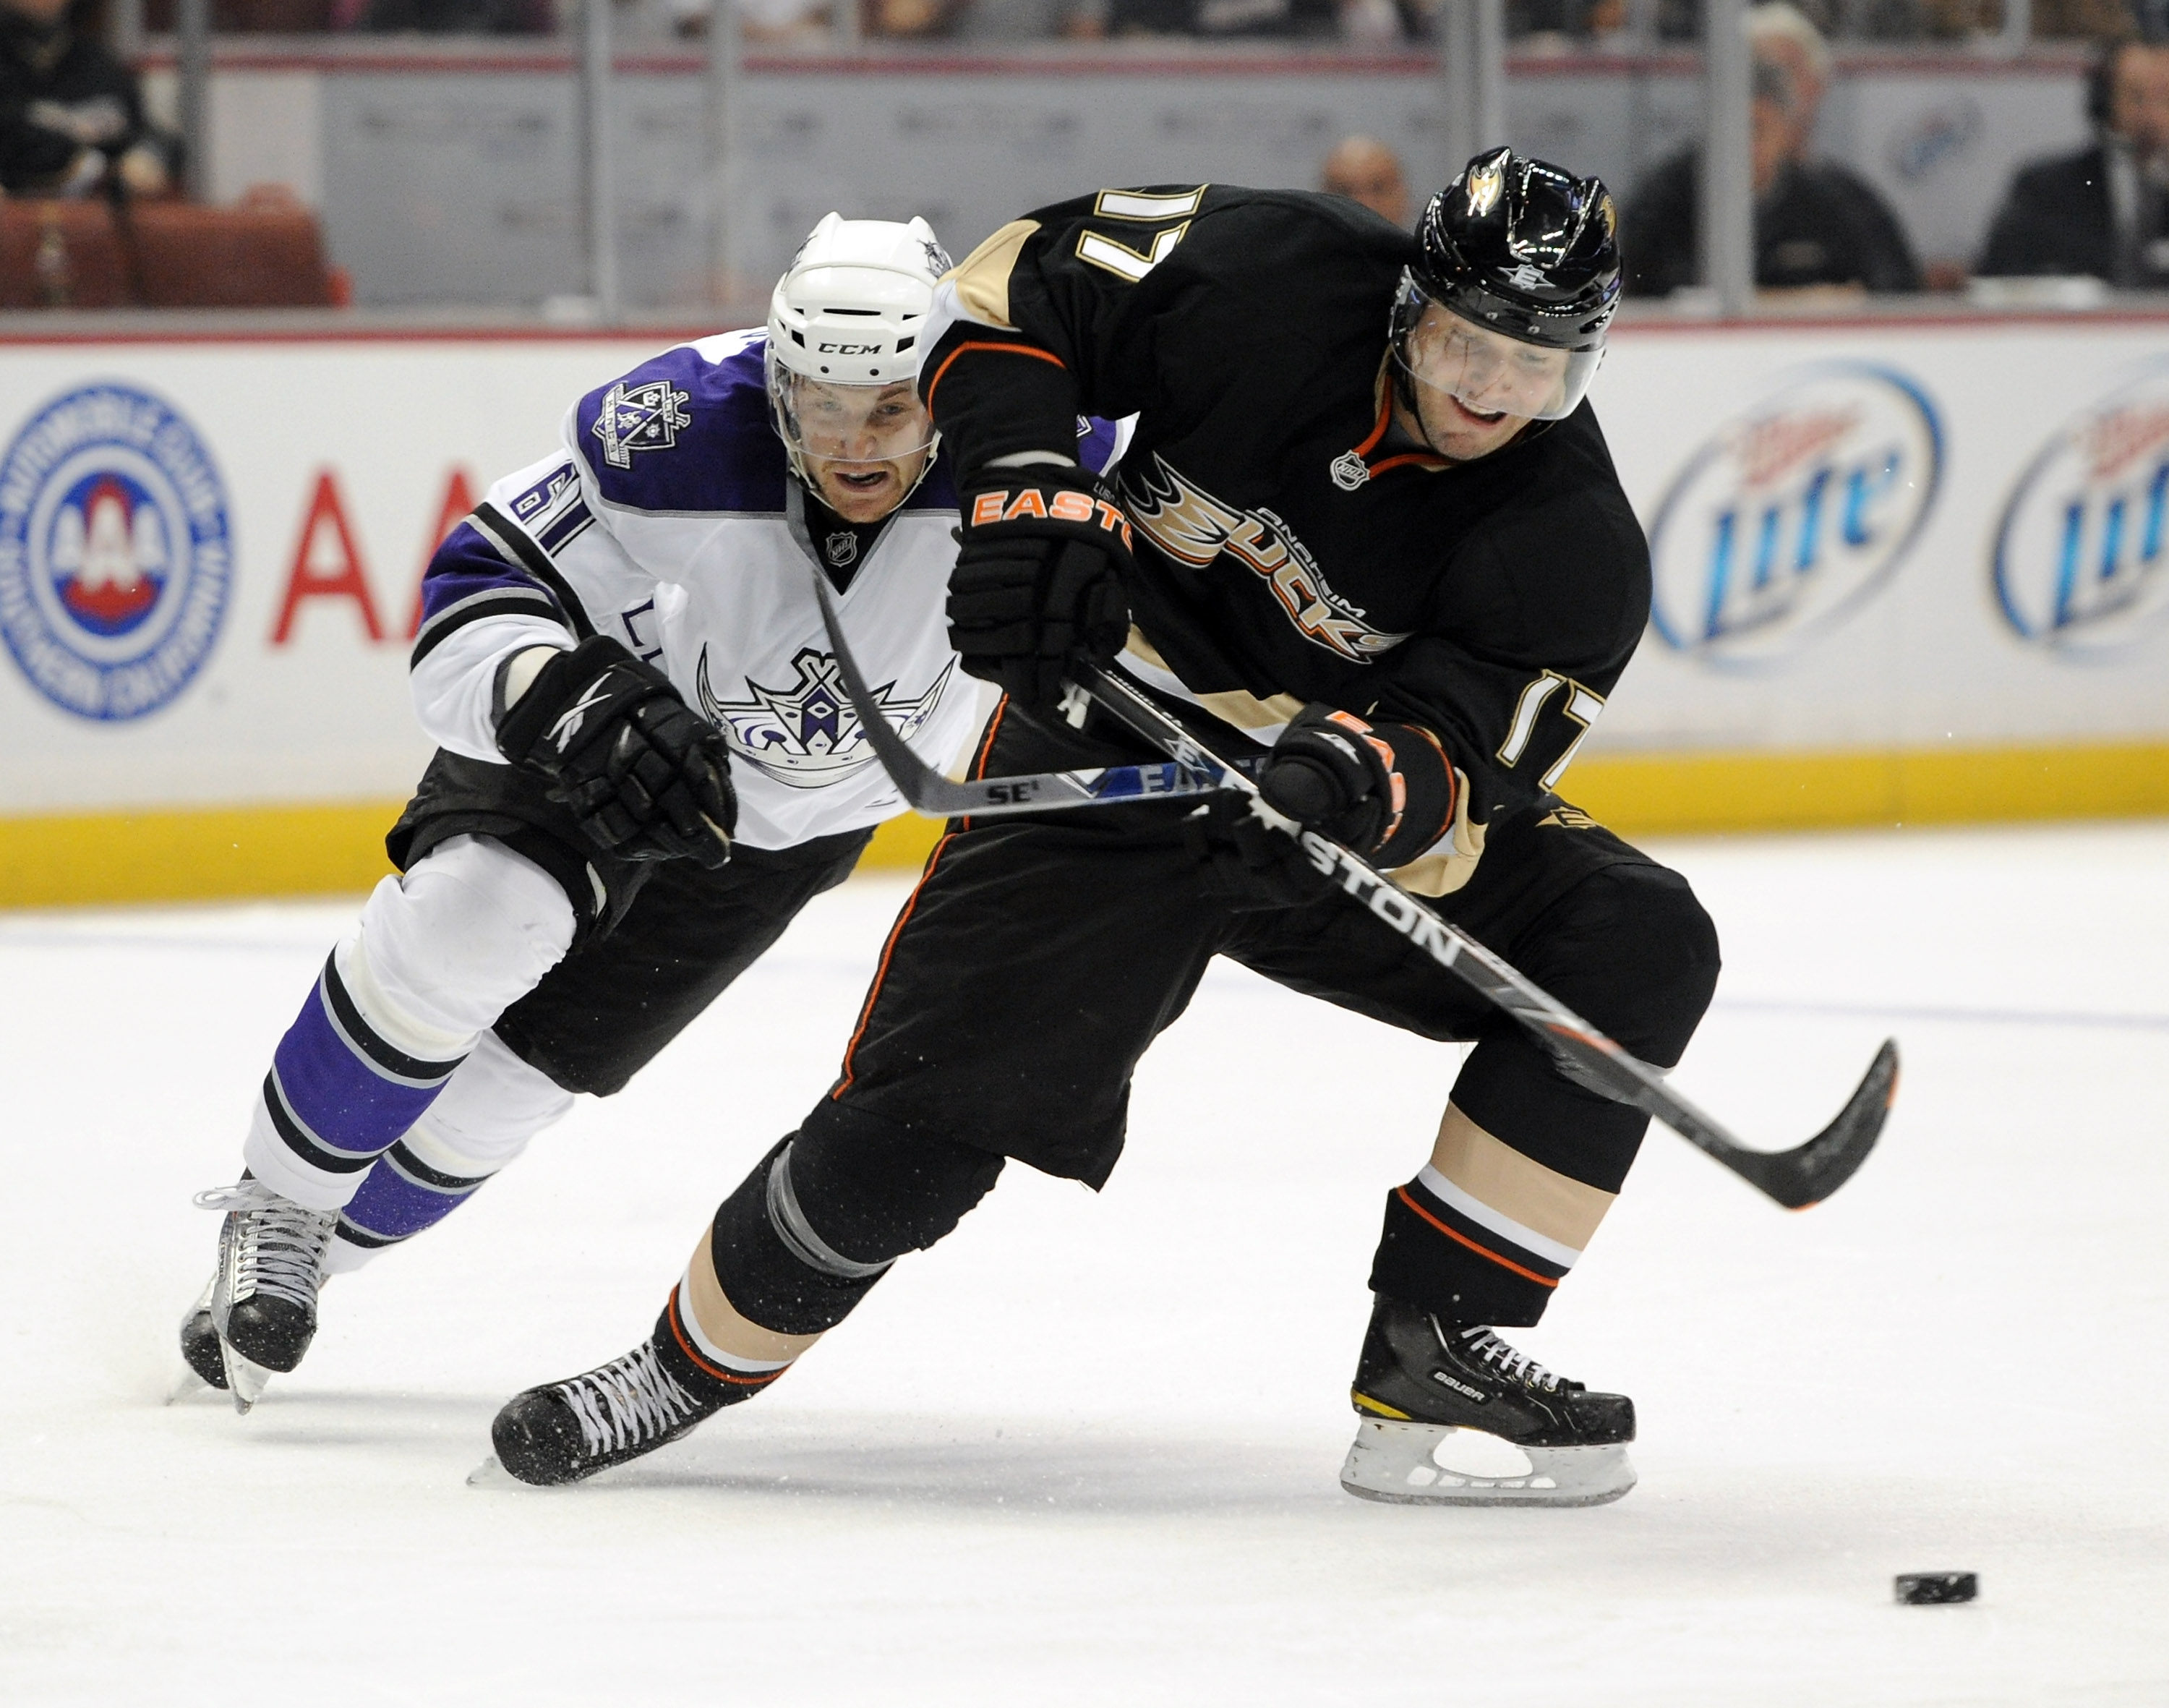 ANAHEIM, CA - OCTOBER 03:  Lubomir Visnovsky #17 of the Anaheim Ducks is chased by Trevor Lewis #61 of the Los Angeles Kings at Honda Center on October 3, 2010 in Anaheim, California.  (Photo by Harry How/Getty Images)